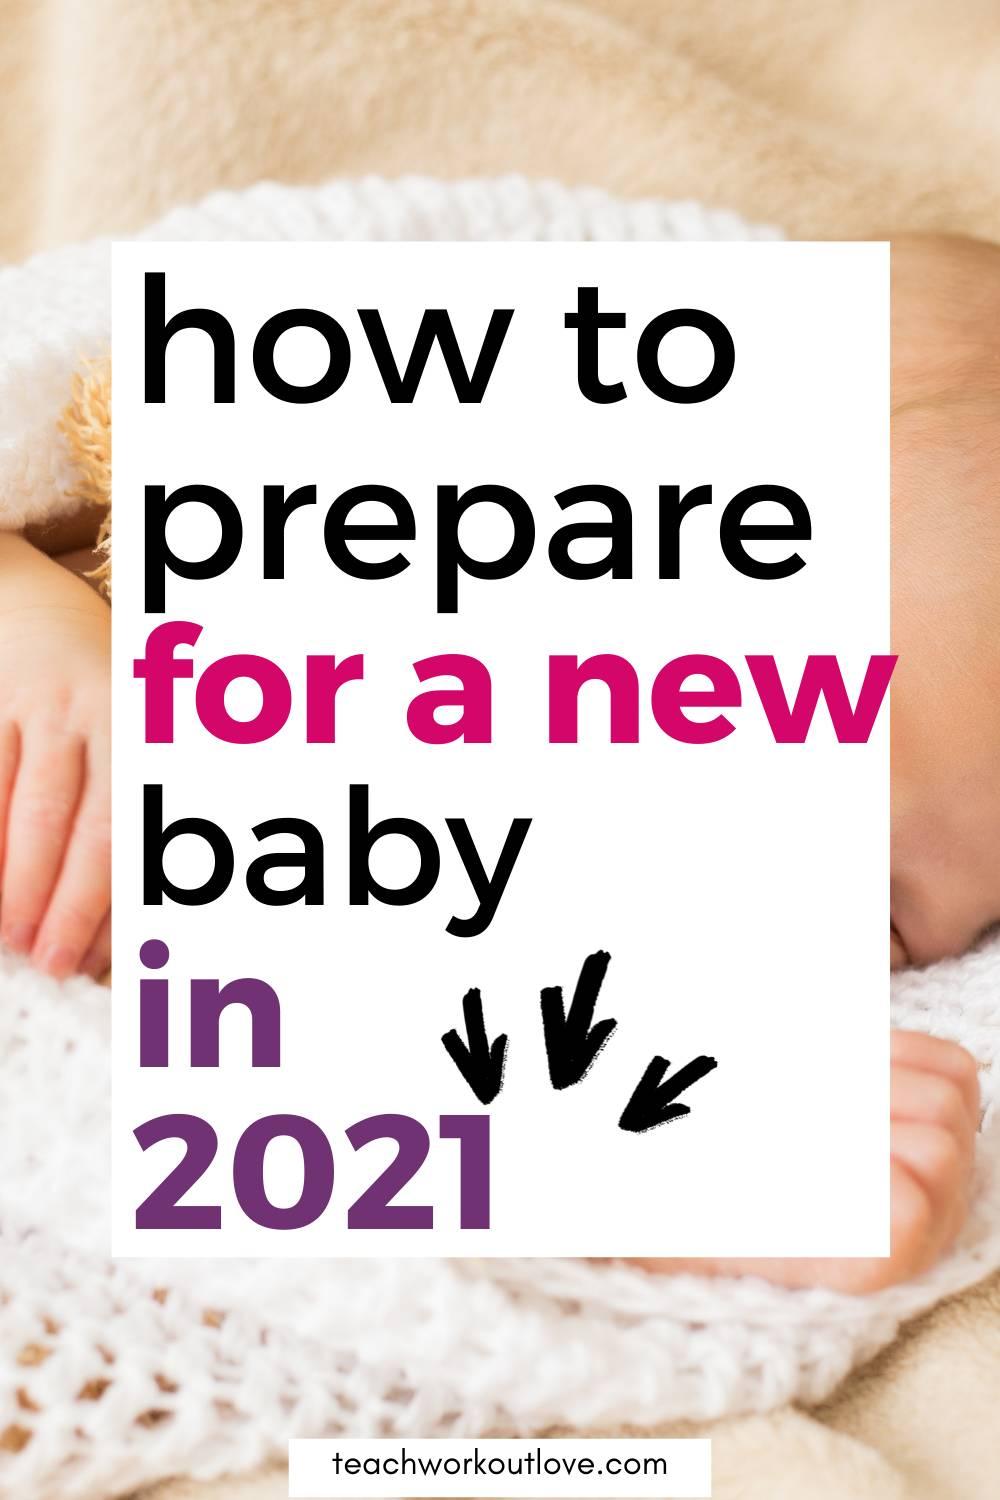 Ok, so you have a baby on the way.... don't sweat it - We've put together the best tips and tricks on how to prepare for a baby in 2021!